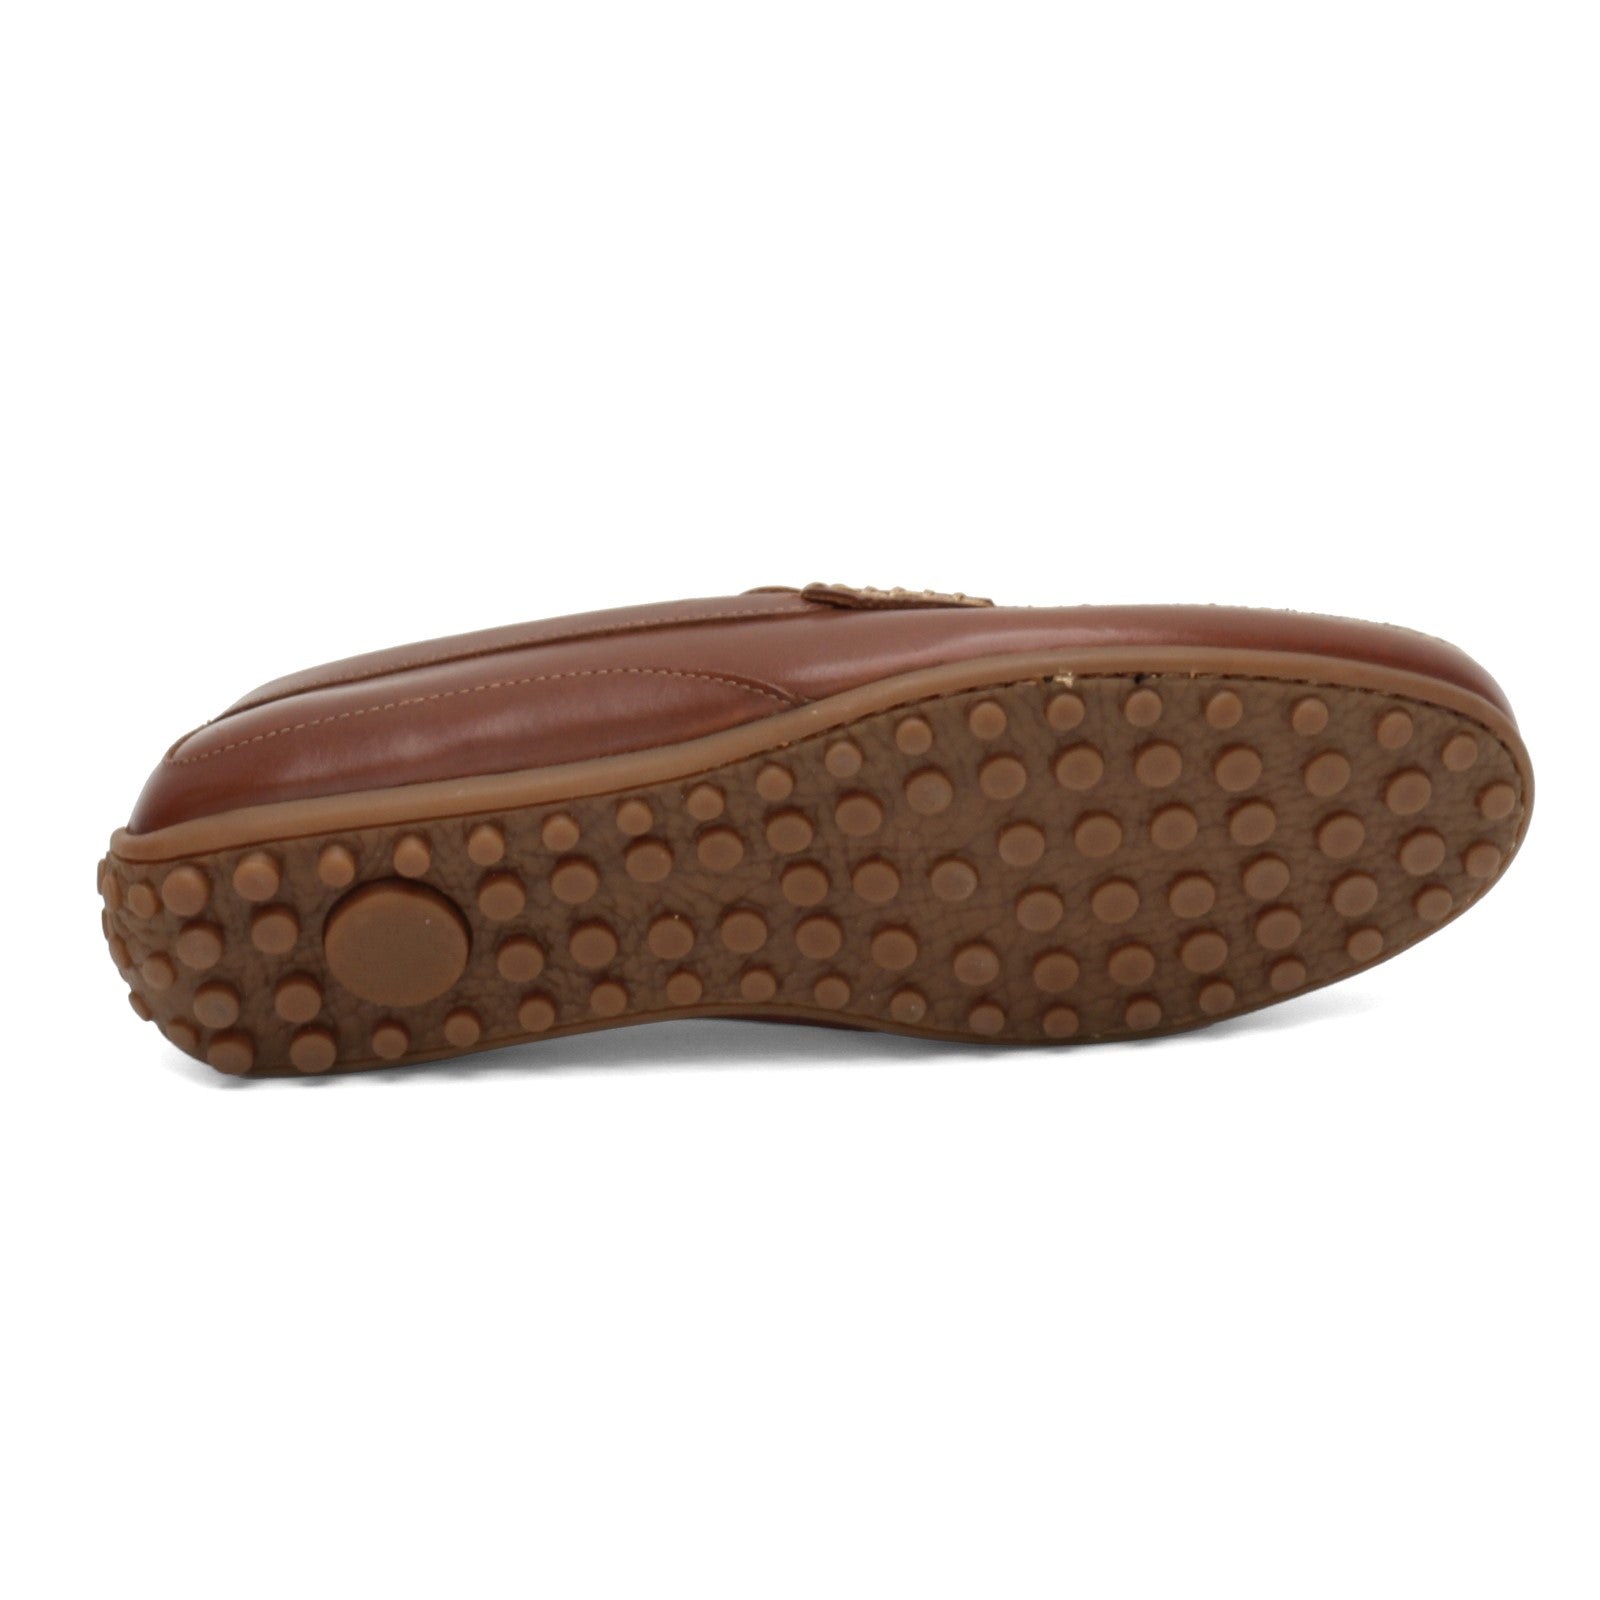 Men's Florsheim, Oval Moc Toe Penny Drivers. This driving moc is perfect for your casual looks. Leather uppers with smooth leather linings Slip on style for an easy on and off Memory foam cushioned footbed for added comfort Manmade outsole